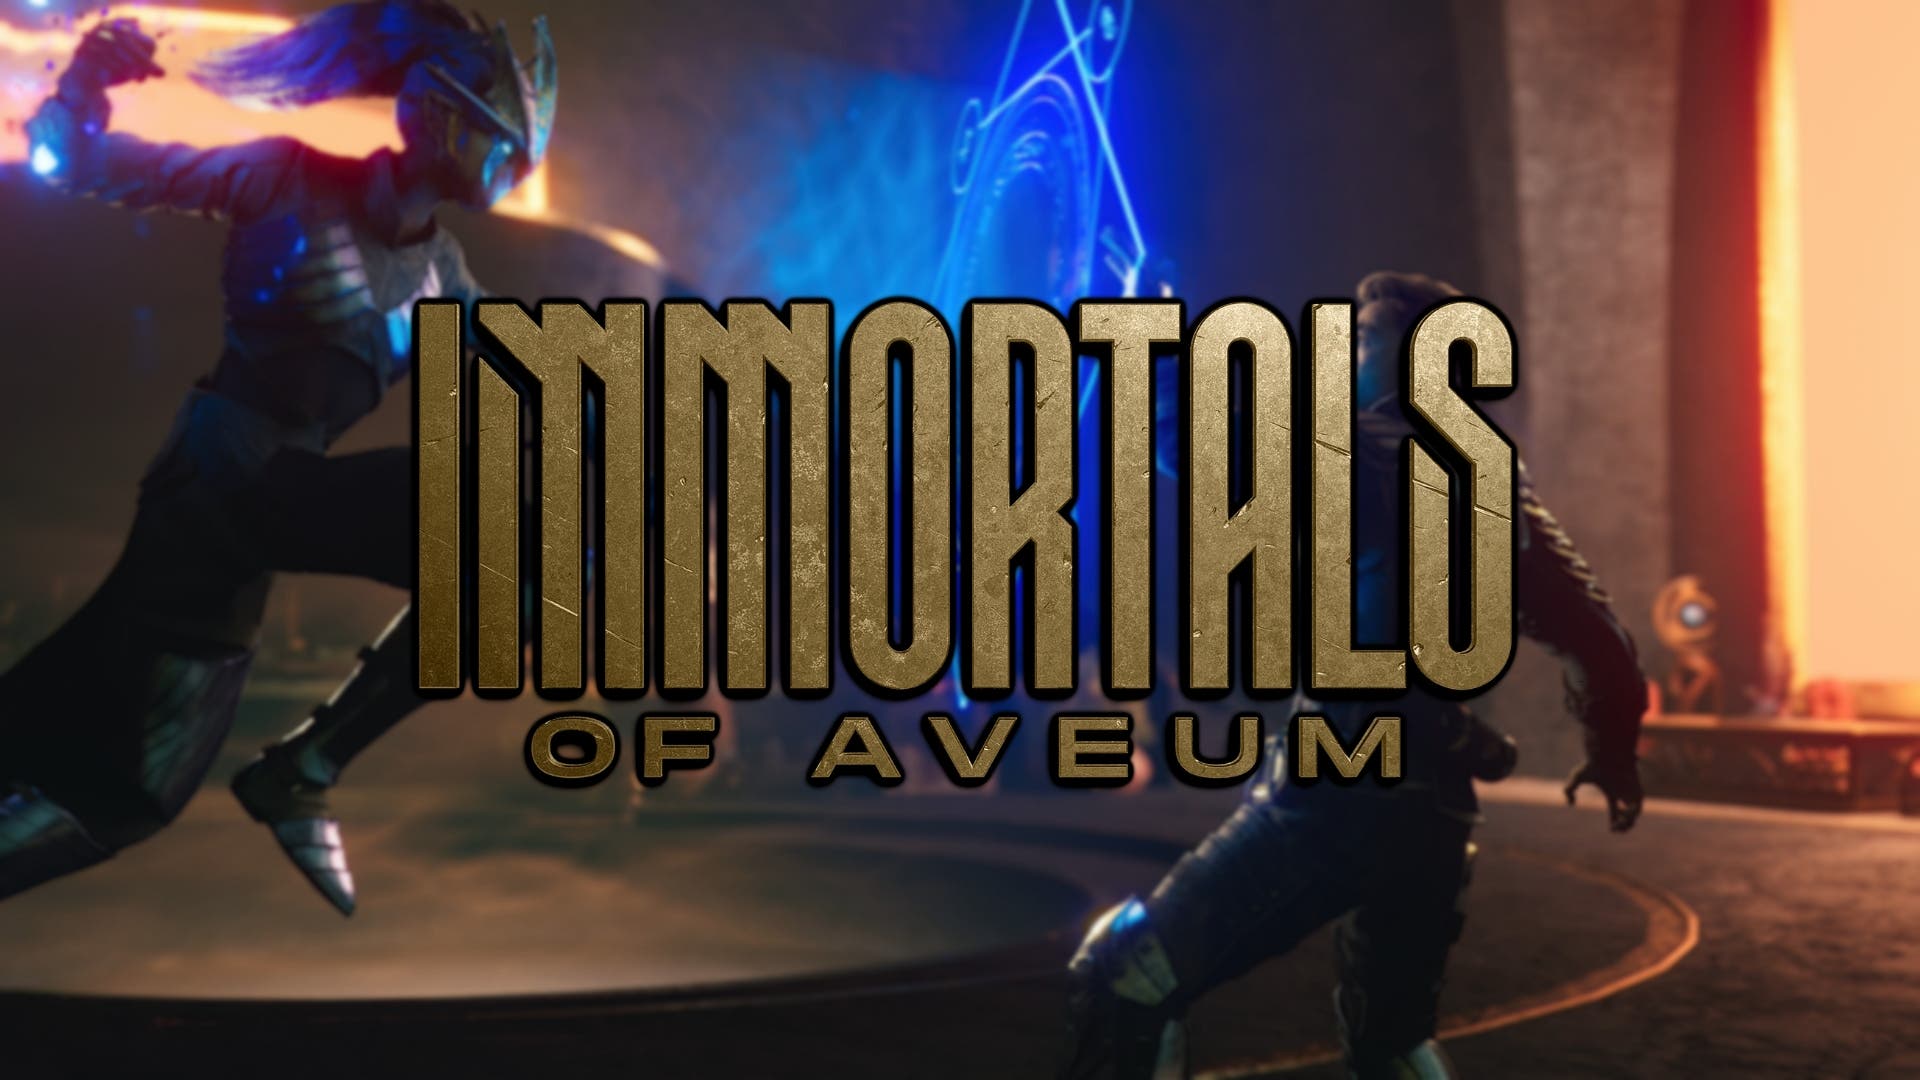 Immortals of Aveum, the new game from EA Originals, shines with its magical first gameplay